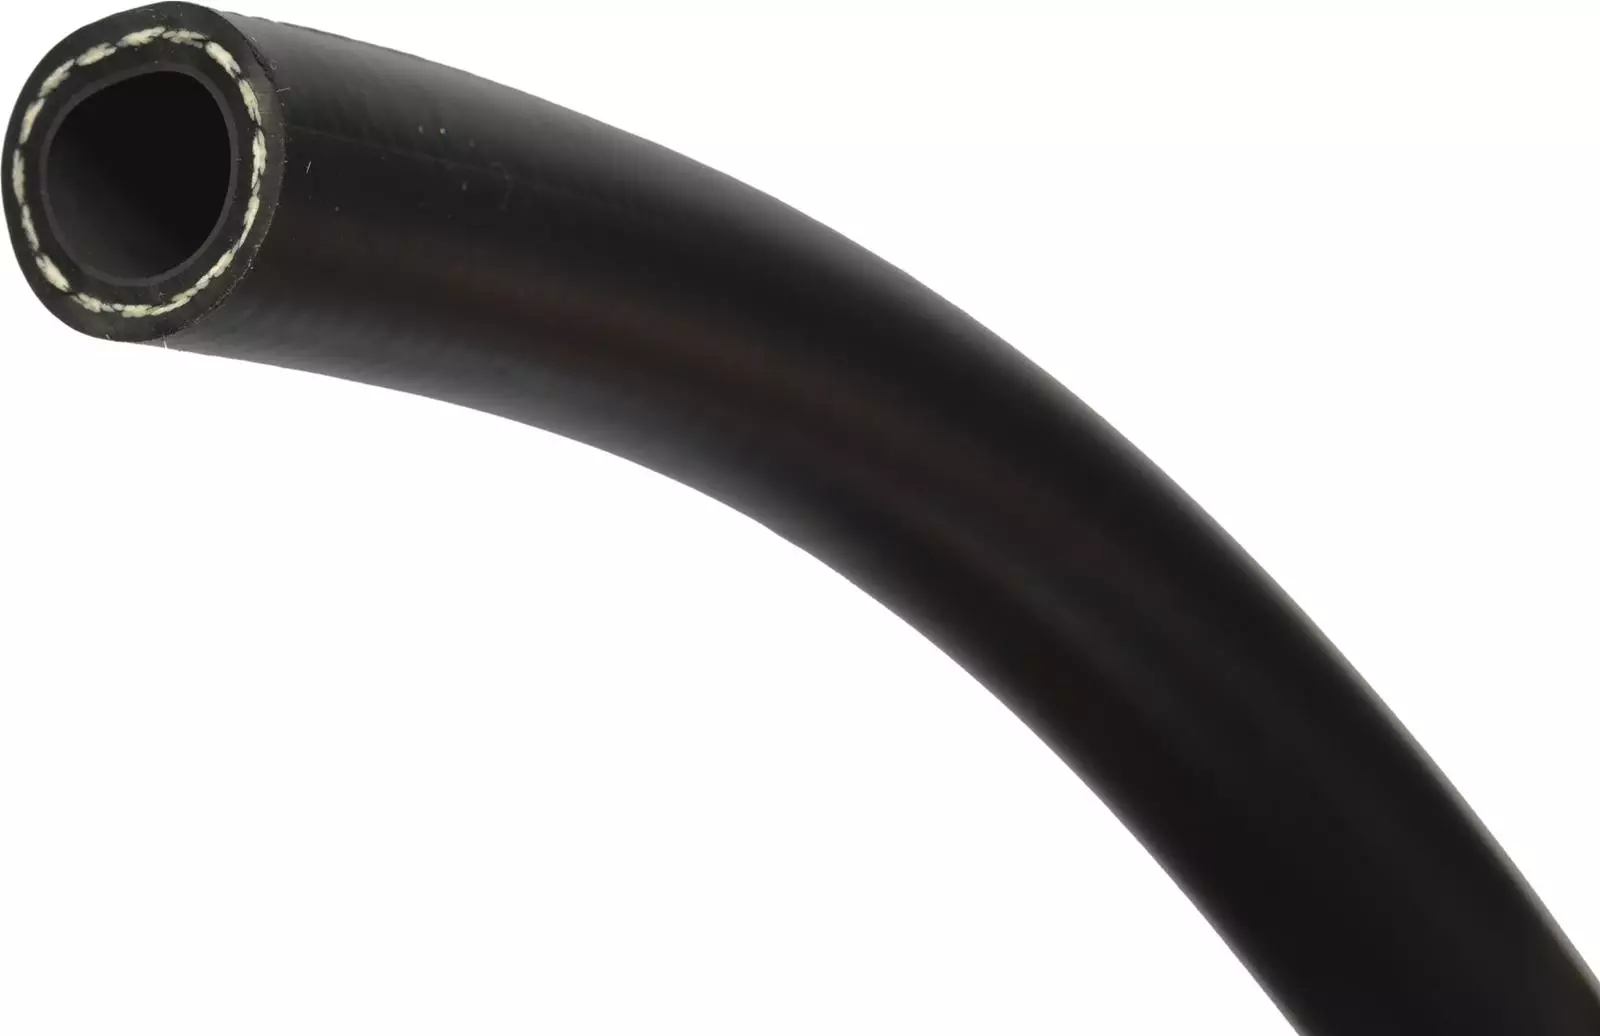 Buyer’s Guide: How to Pick the Best Flexible Fuel Hose for Your Vehicle